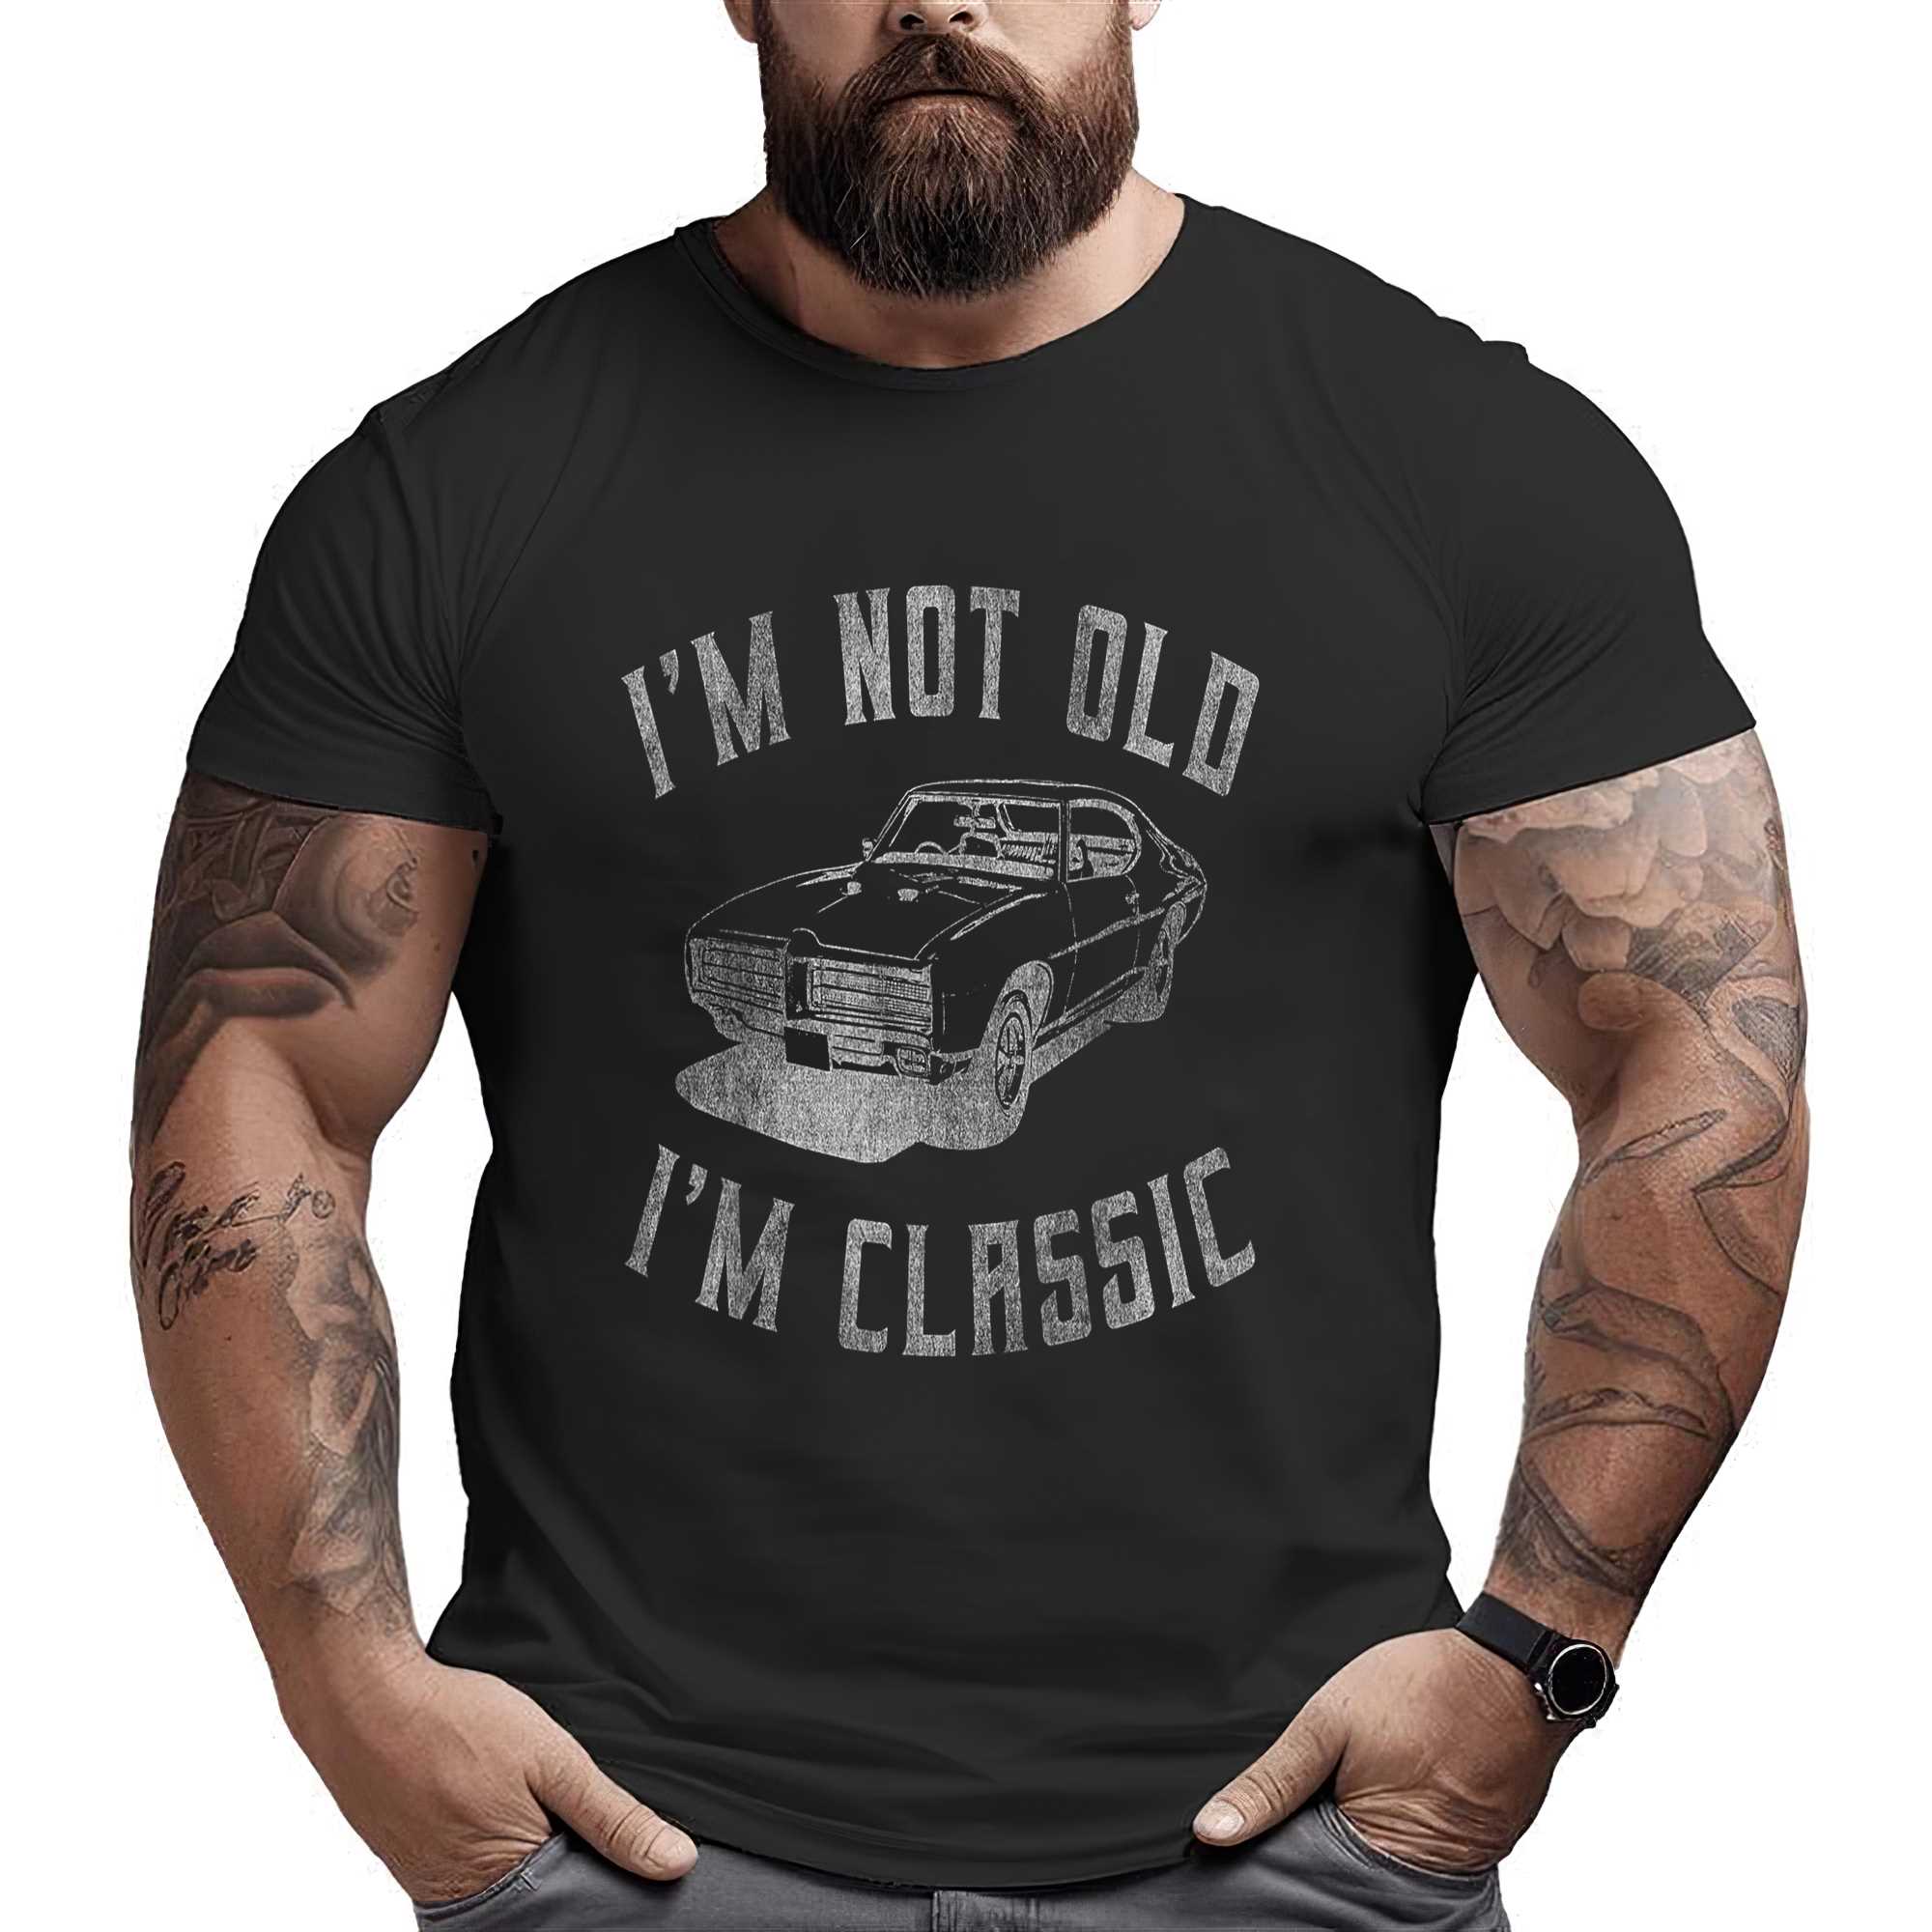 I’m Not Old I’m Classic Funny Car Graphic – Mens Womens Short Sleeve T-shirt